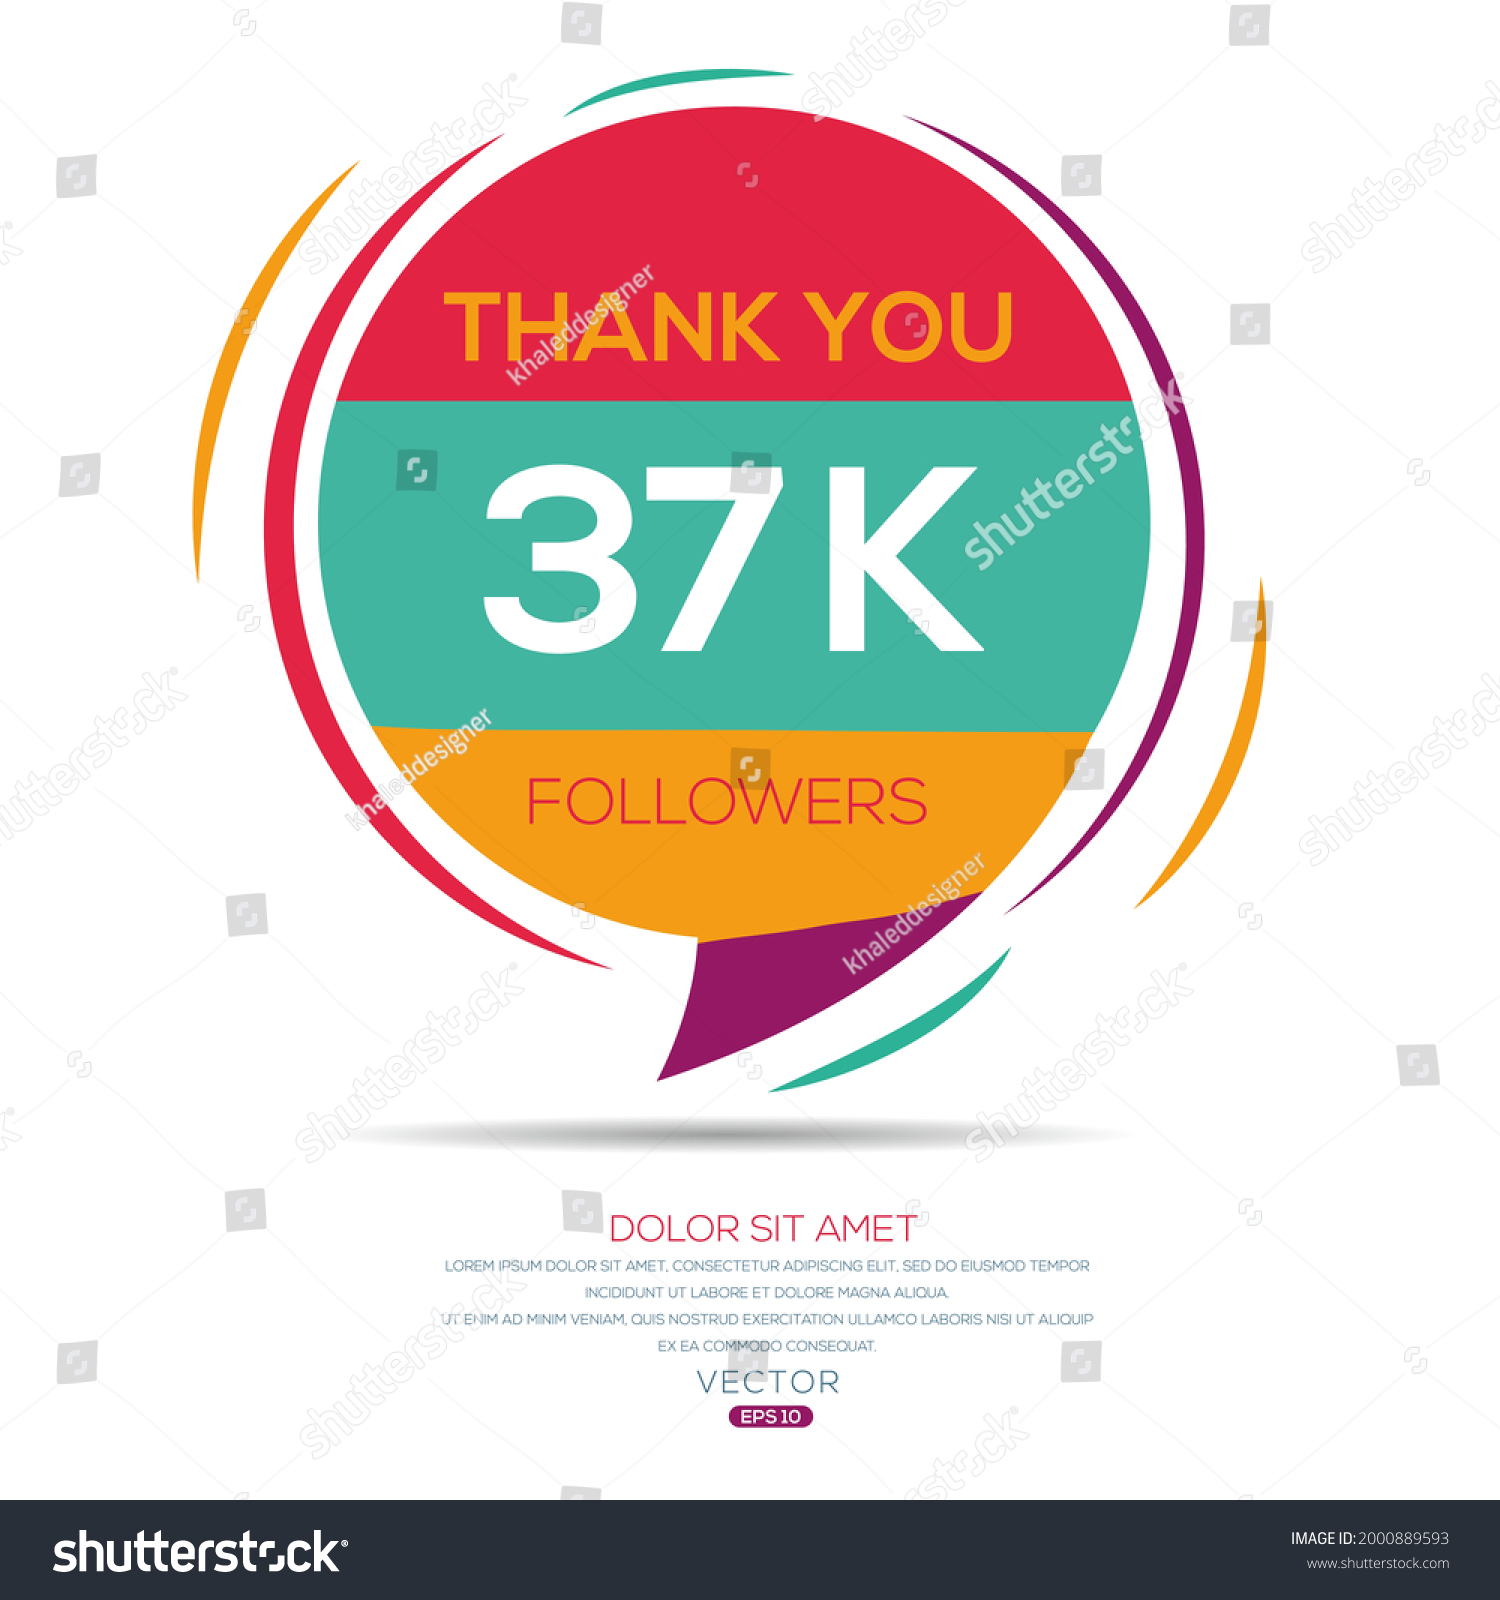 SVG of Creative Thank you (37k, 37000) followers celebration template design for social network and follower ,Vector illustration. svg